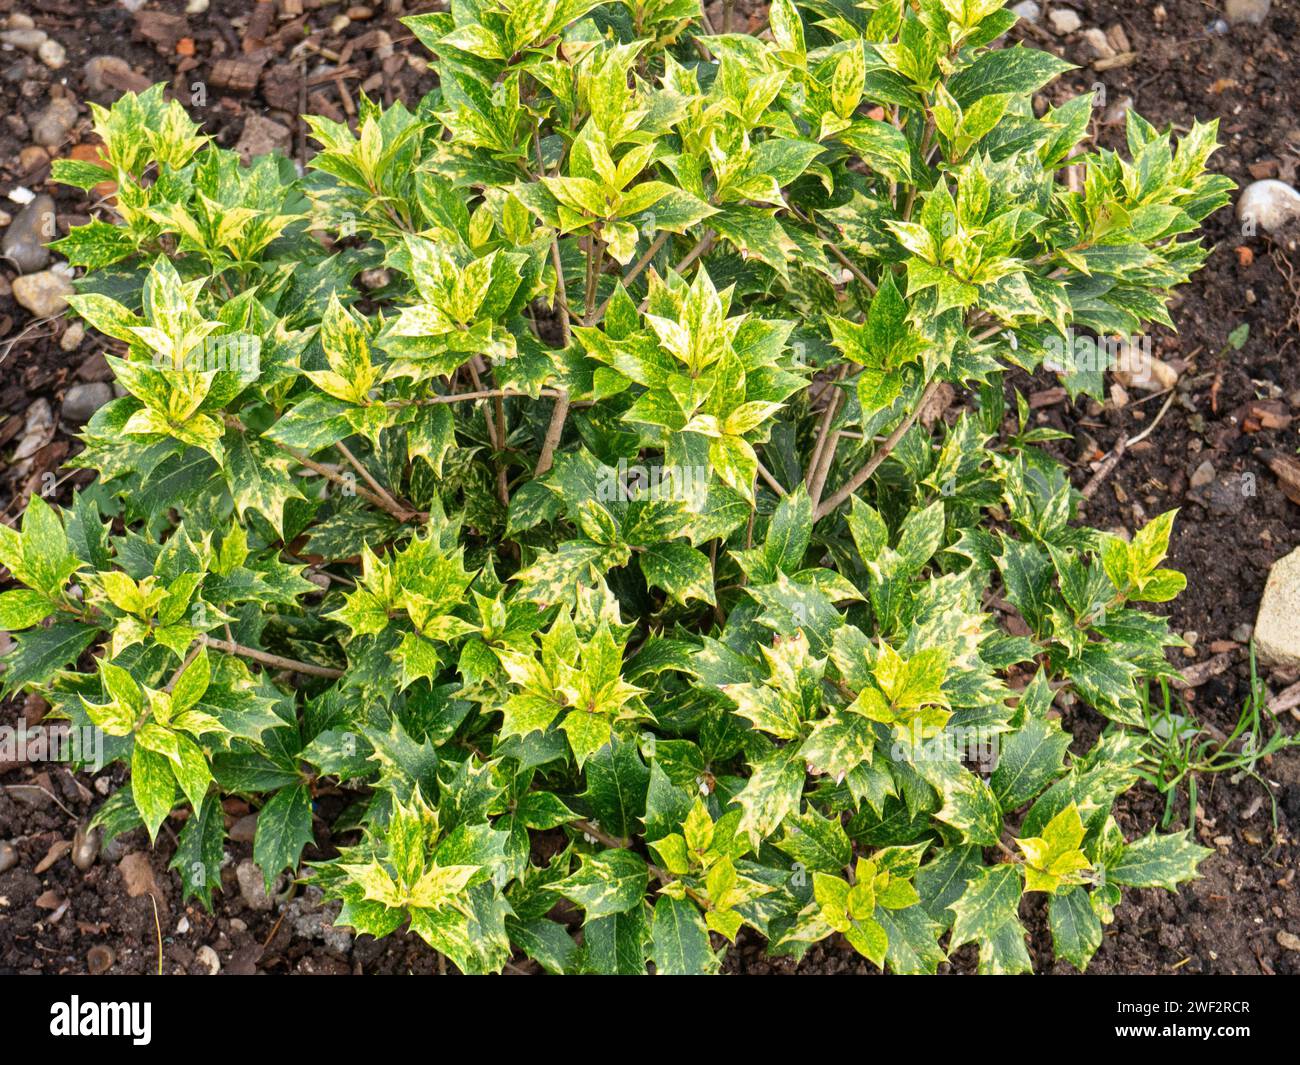 The bright yellow and green variegated holly shaped foliage of Osmanthus heterophyllus Goshiki Stock Photo